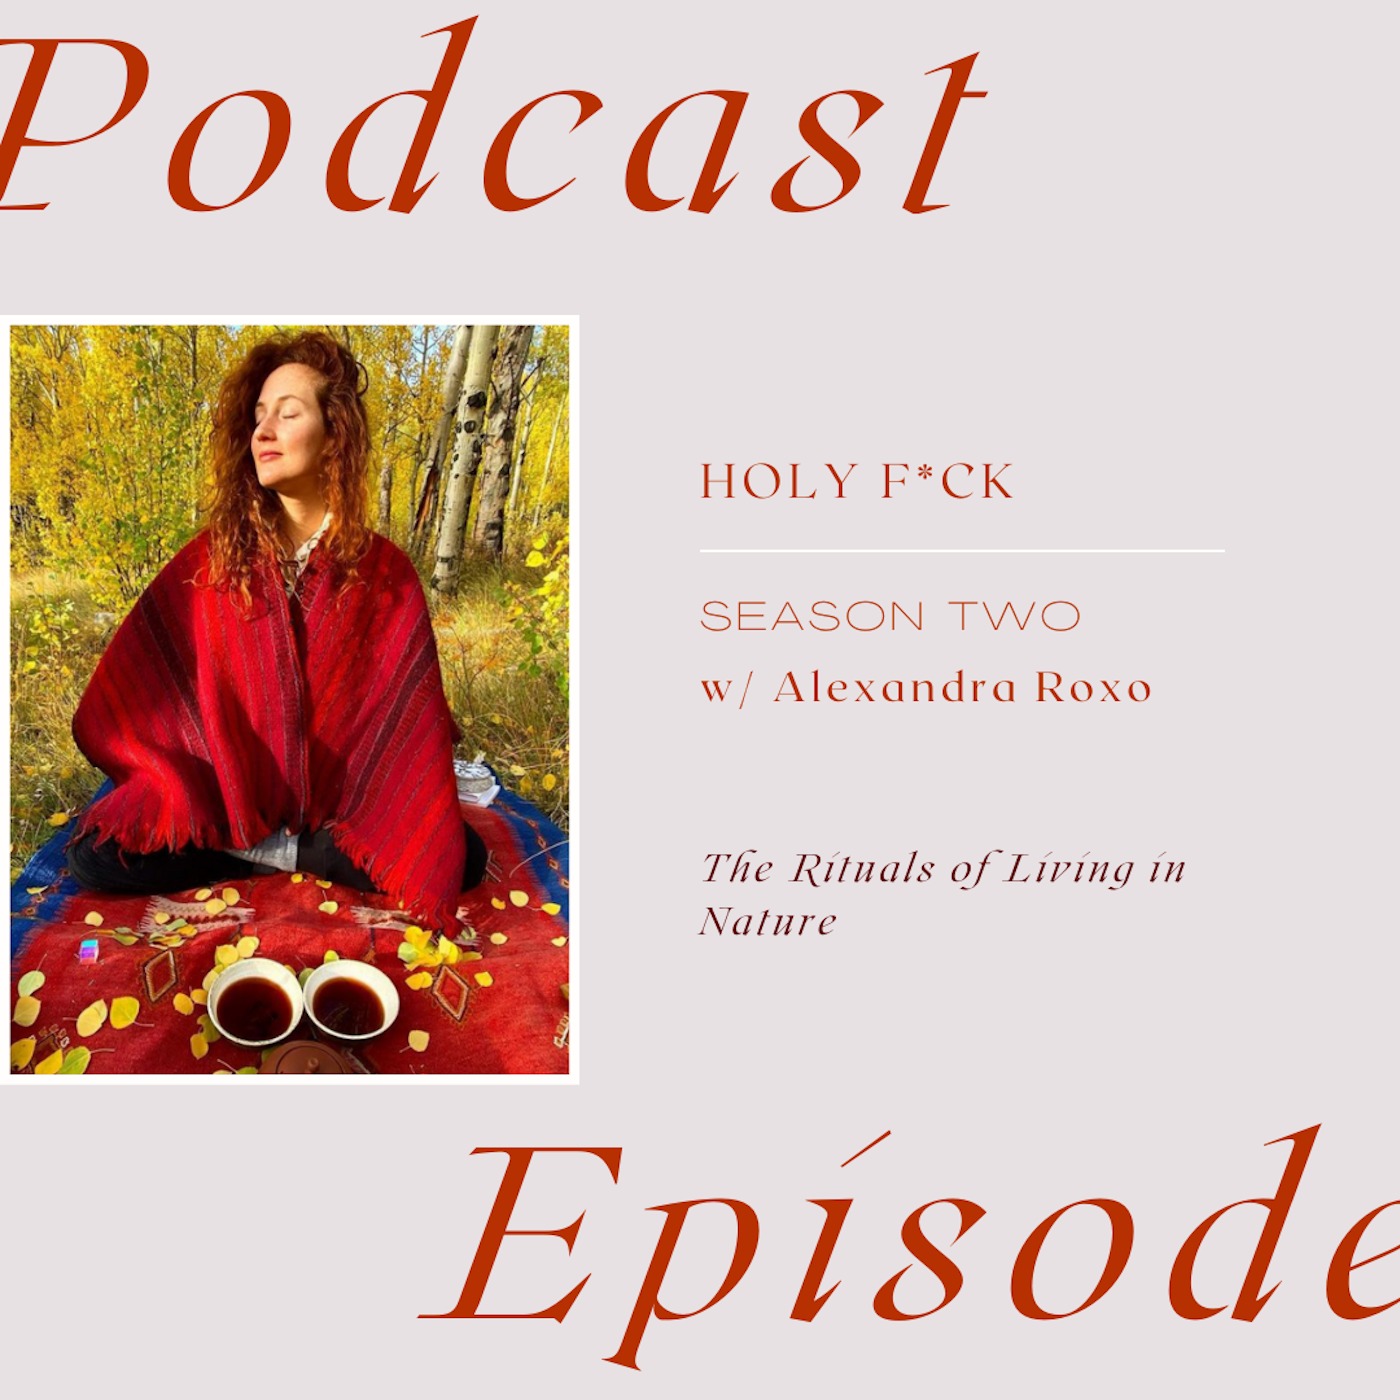 The Rituals of Living in Nature with Alexandra Roxo